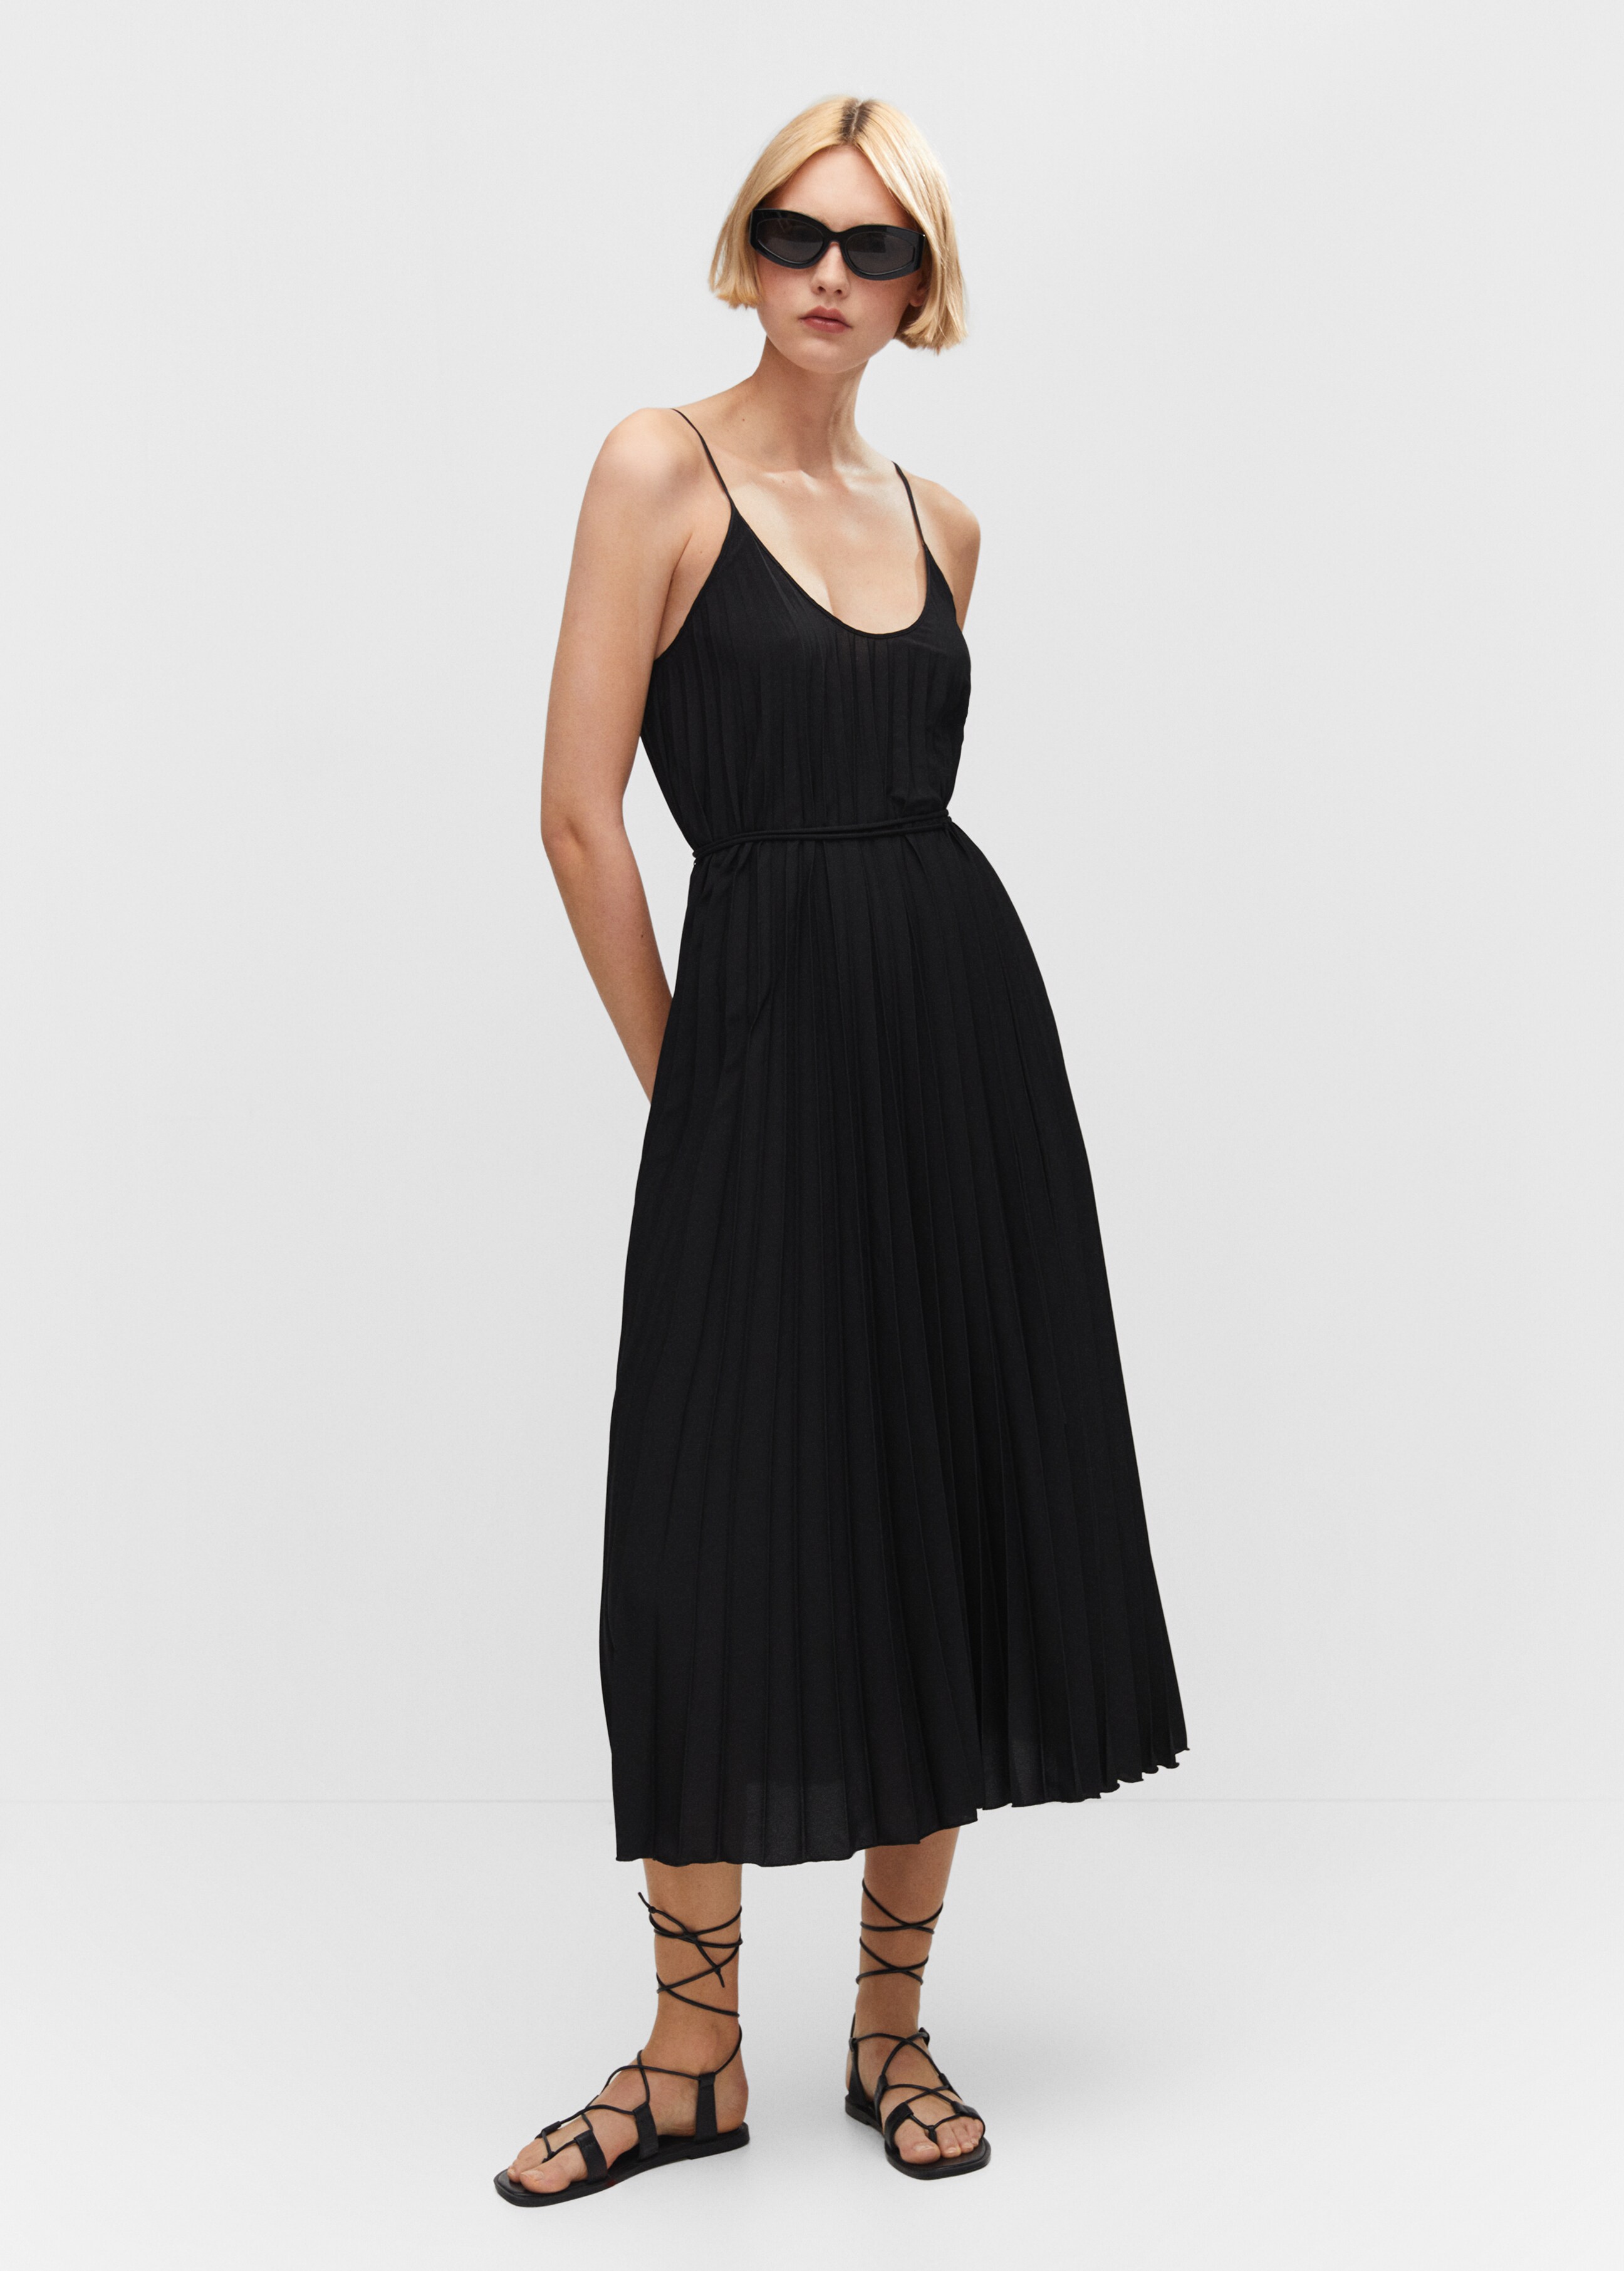 Pleated cord dress - General plane